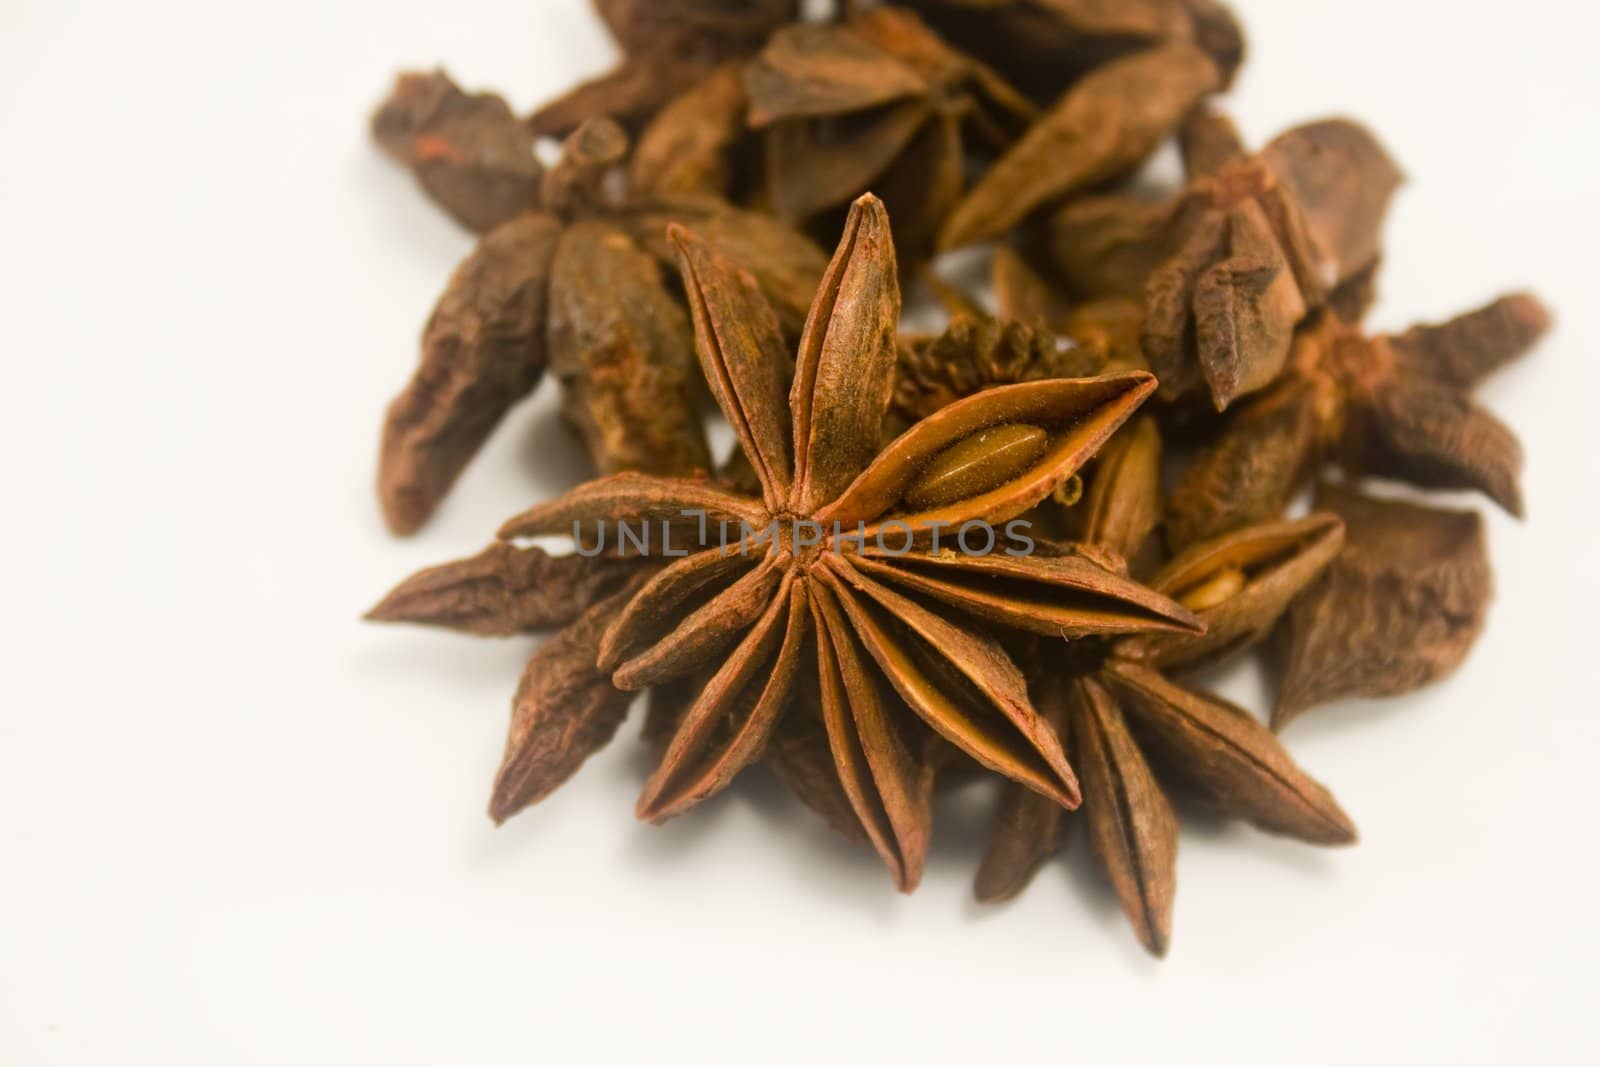 Star anise by timscottrom